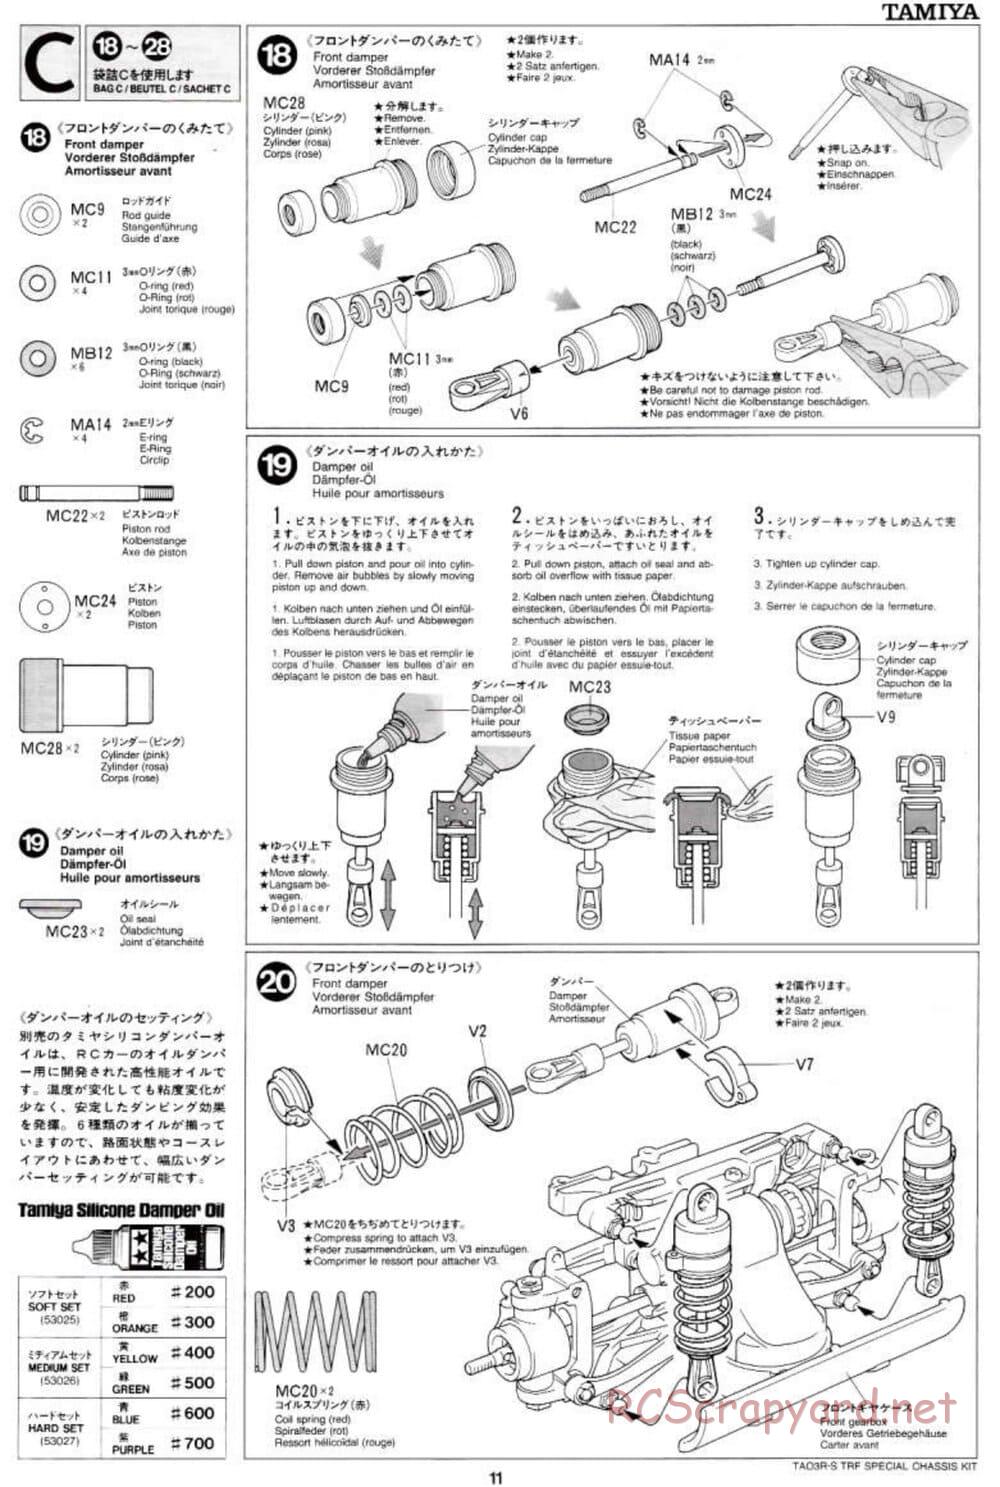 Tamiya - TA-03RS TRF Special Chassis - Manual - Page 11